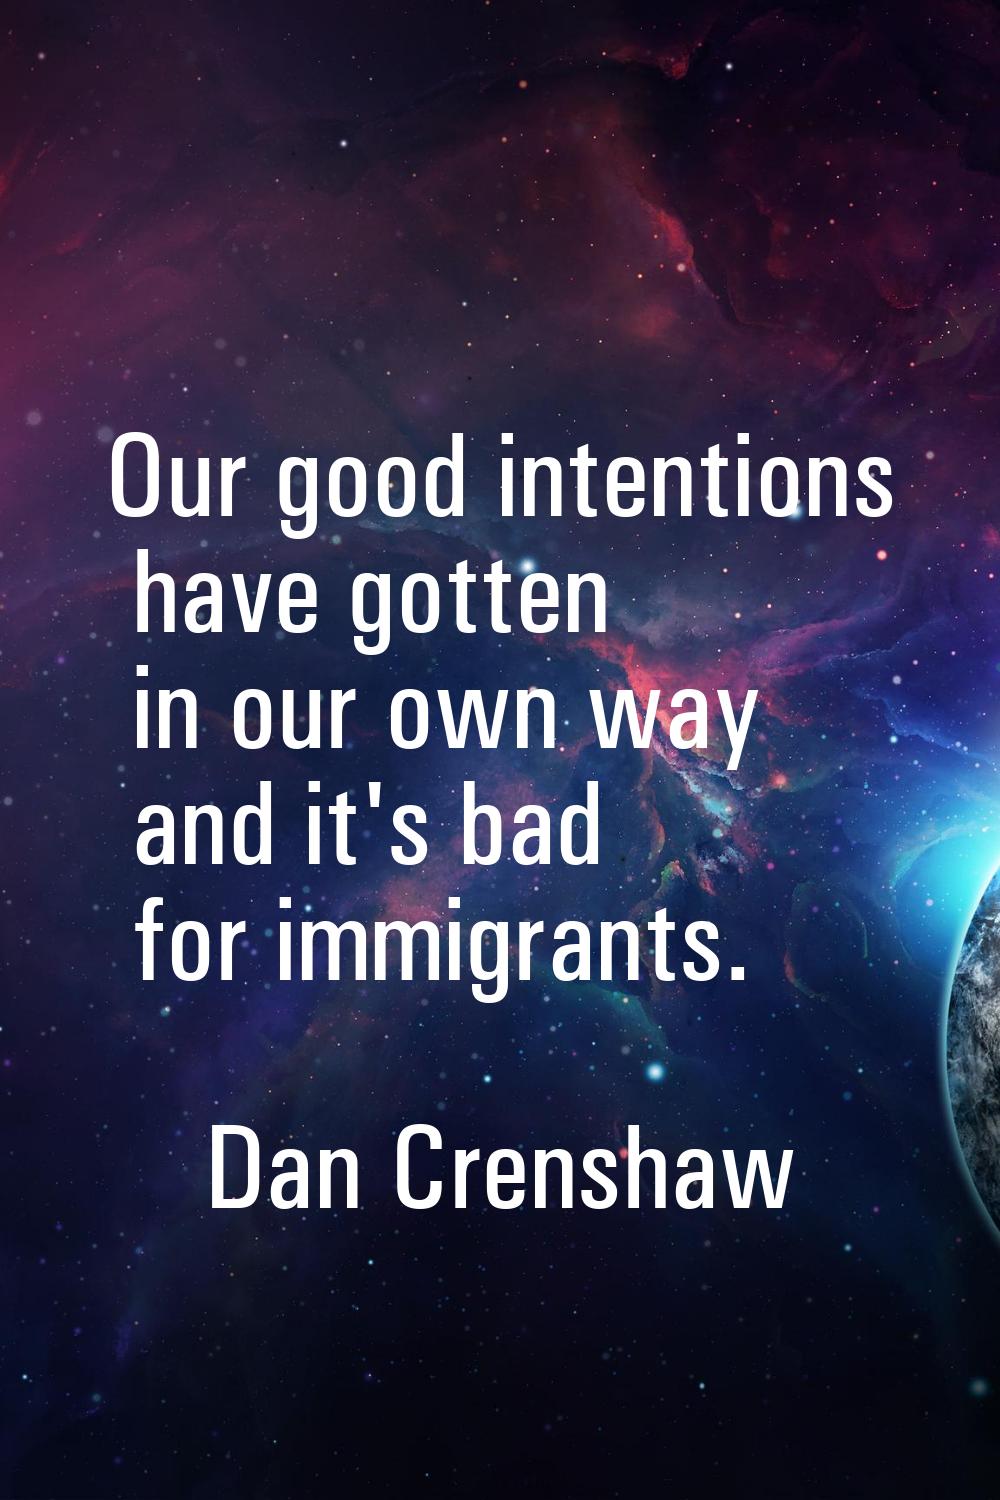 Our good intentions have gotten in our own way and it's bad for immigrants.